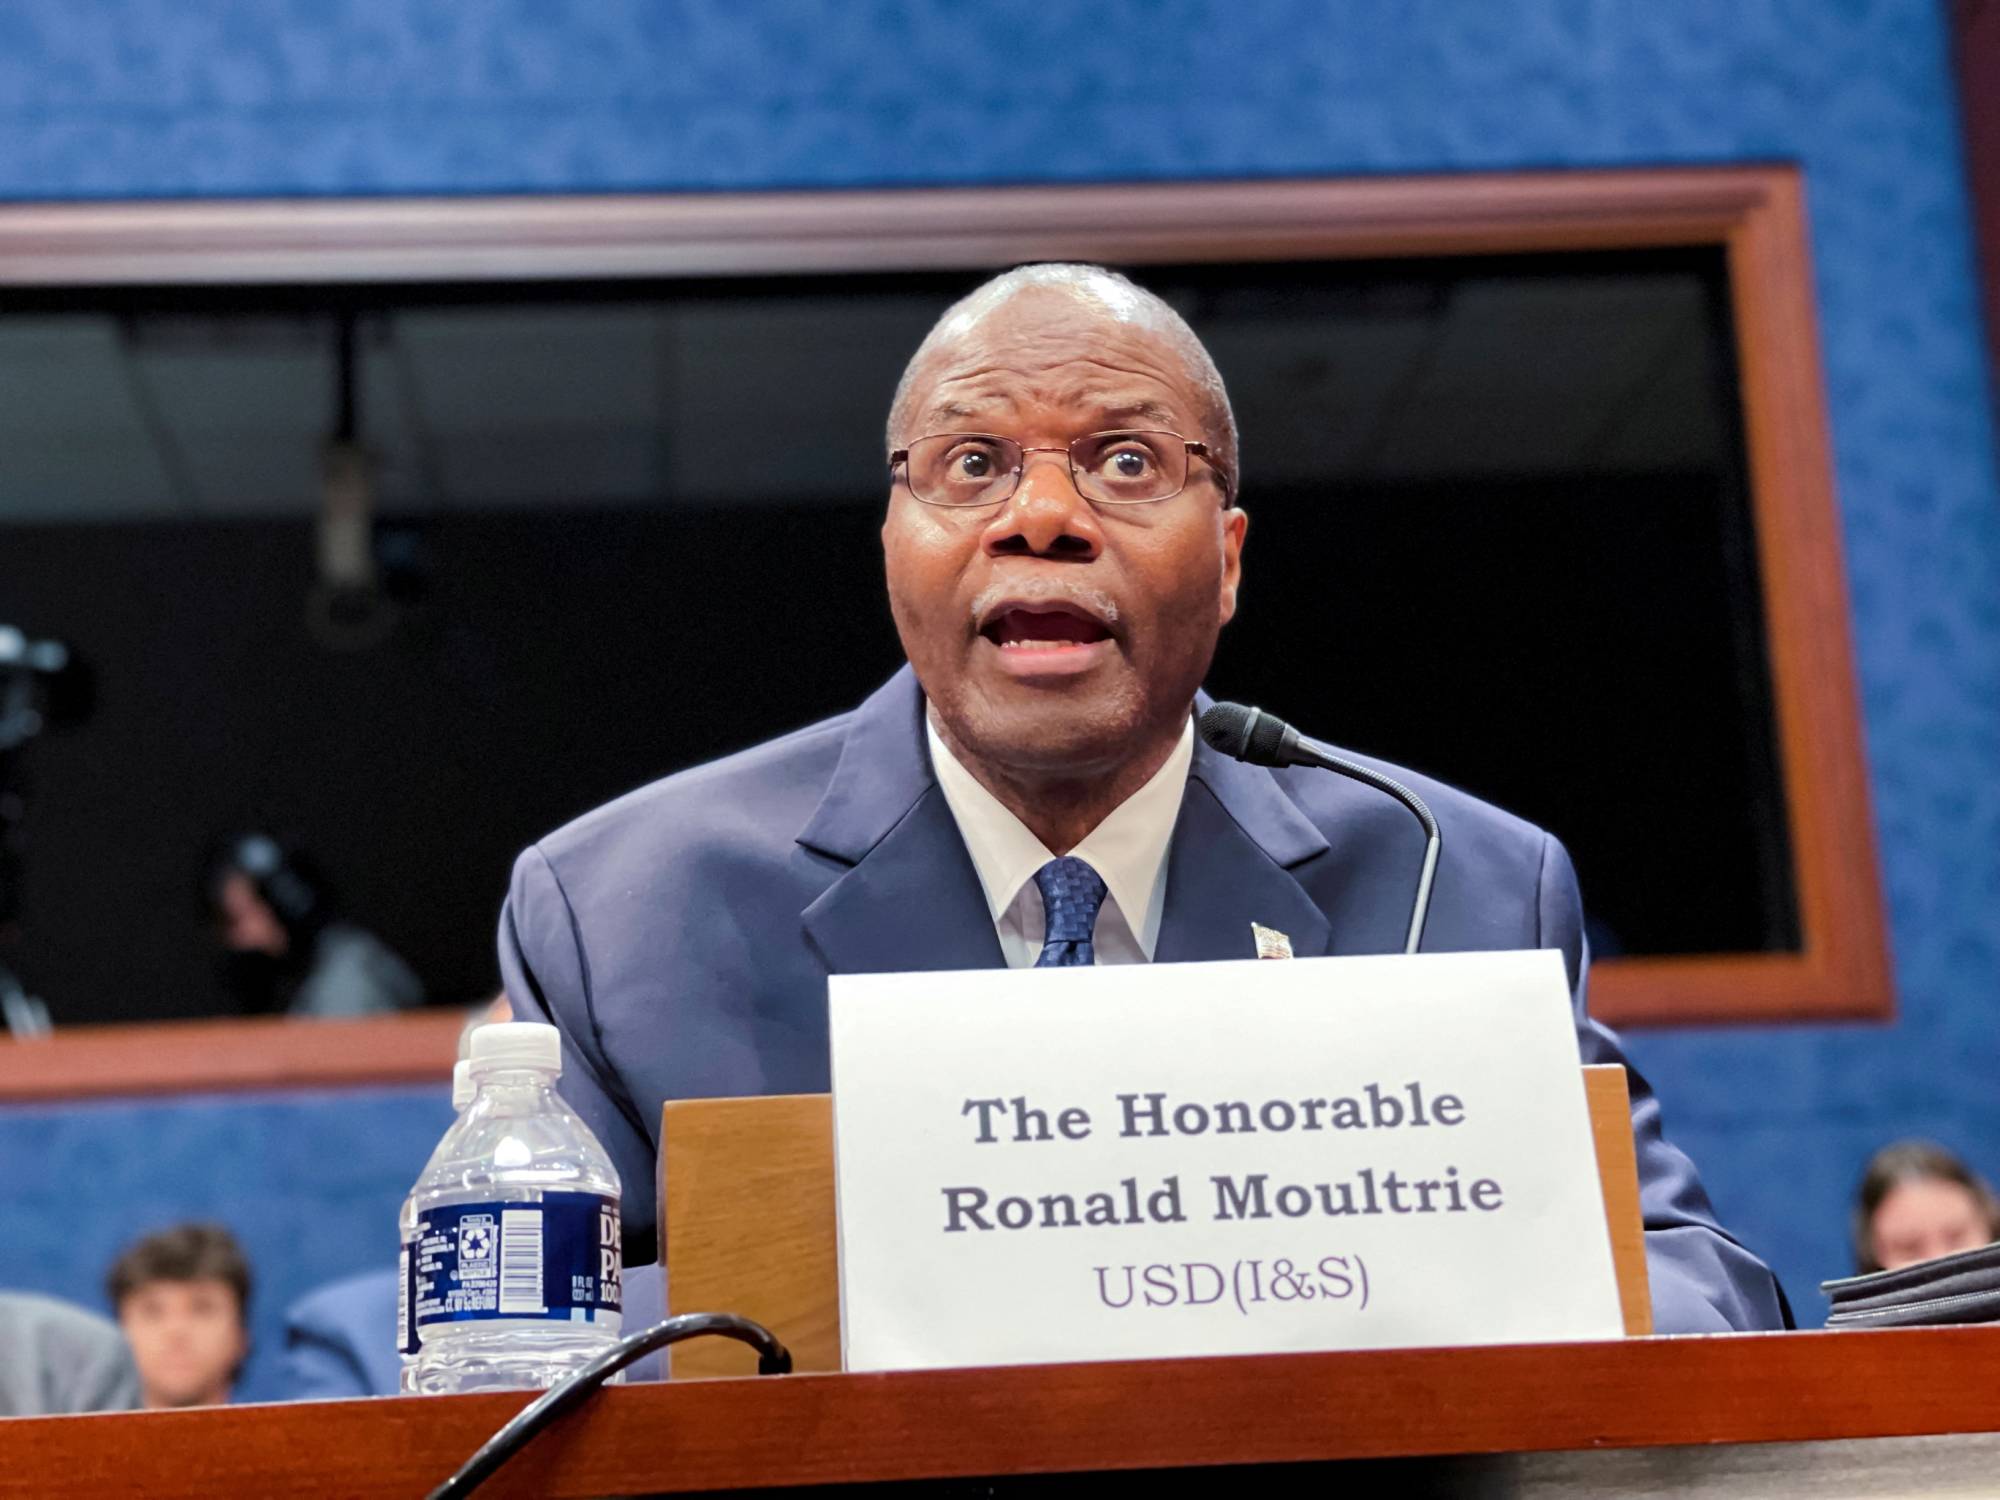 Ronald Moultrie, who oversees a newly formed Pentagon-based UAP (unidentified aerial phenomena) investigation team as U.S. Under Secretary of Defense for Intelligence & Security, testifies in May about these phenomena during a hearing before a U.S. House of Representatives intelligence subcommittee. | REUTERS